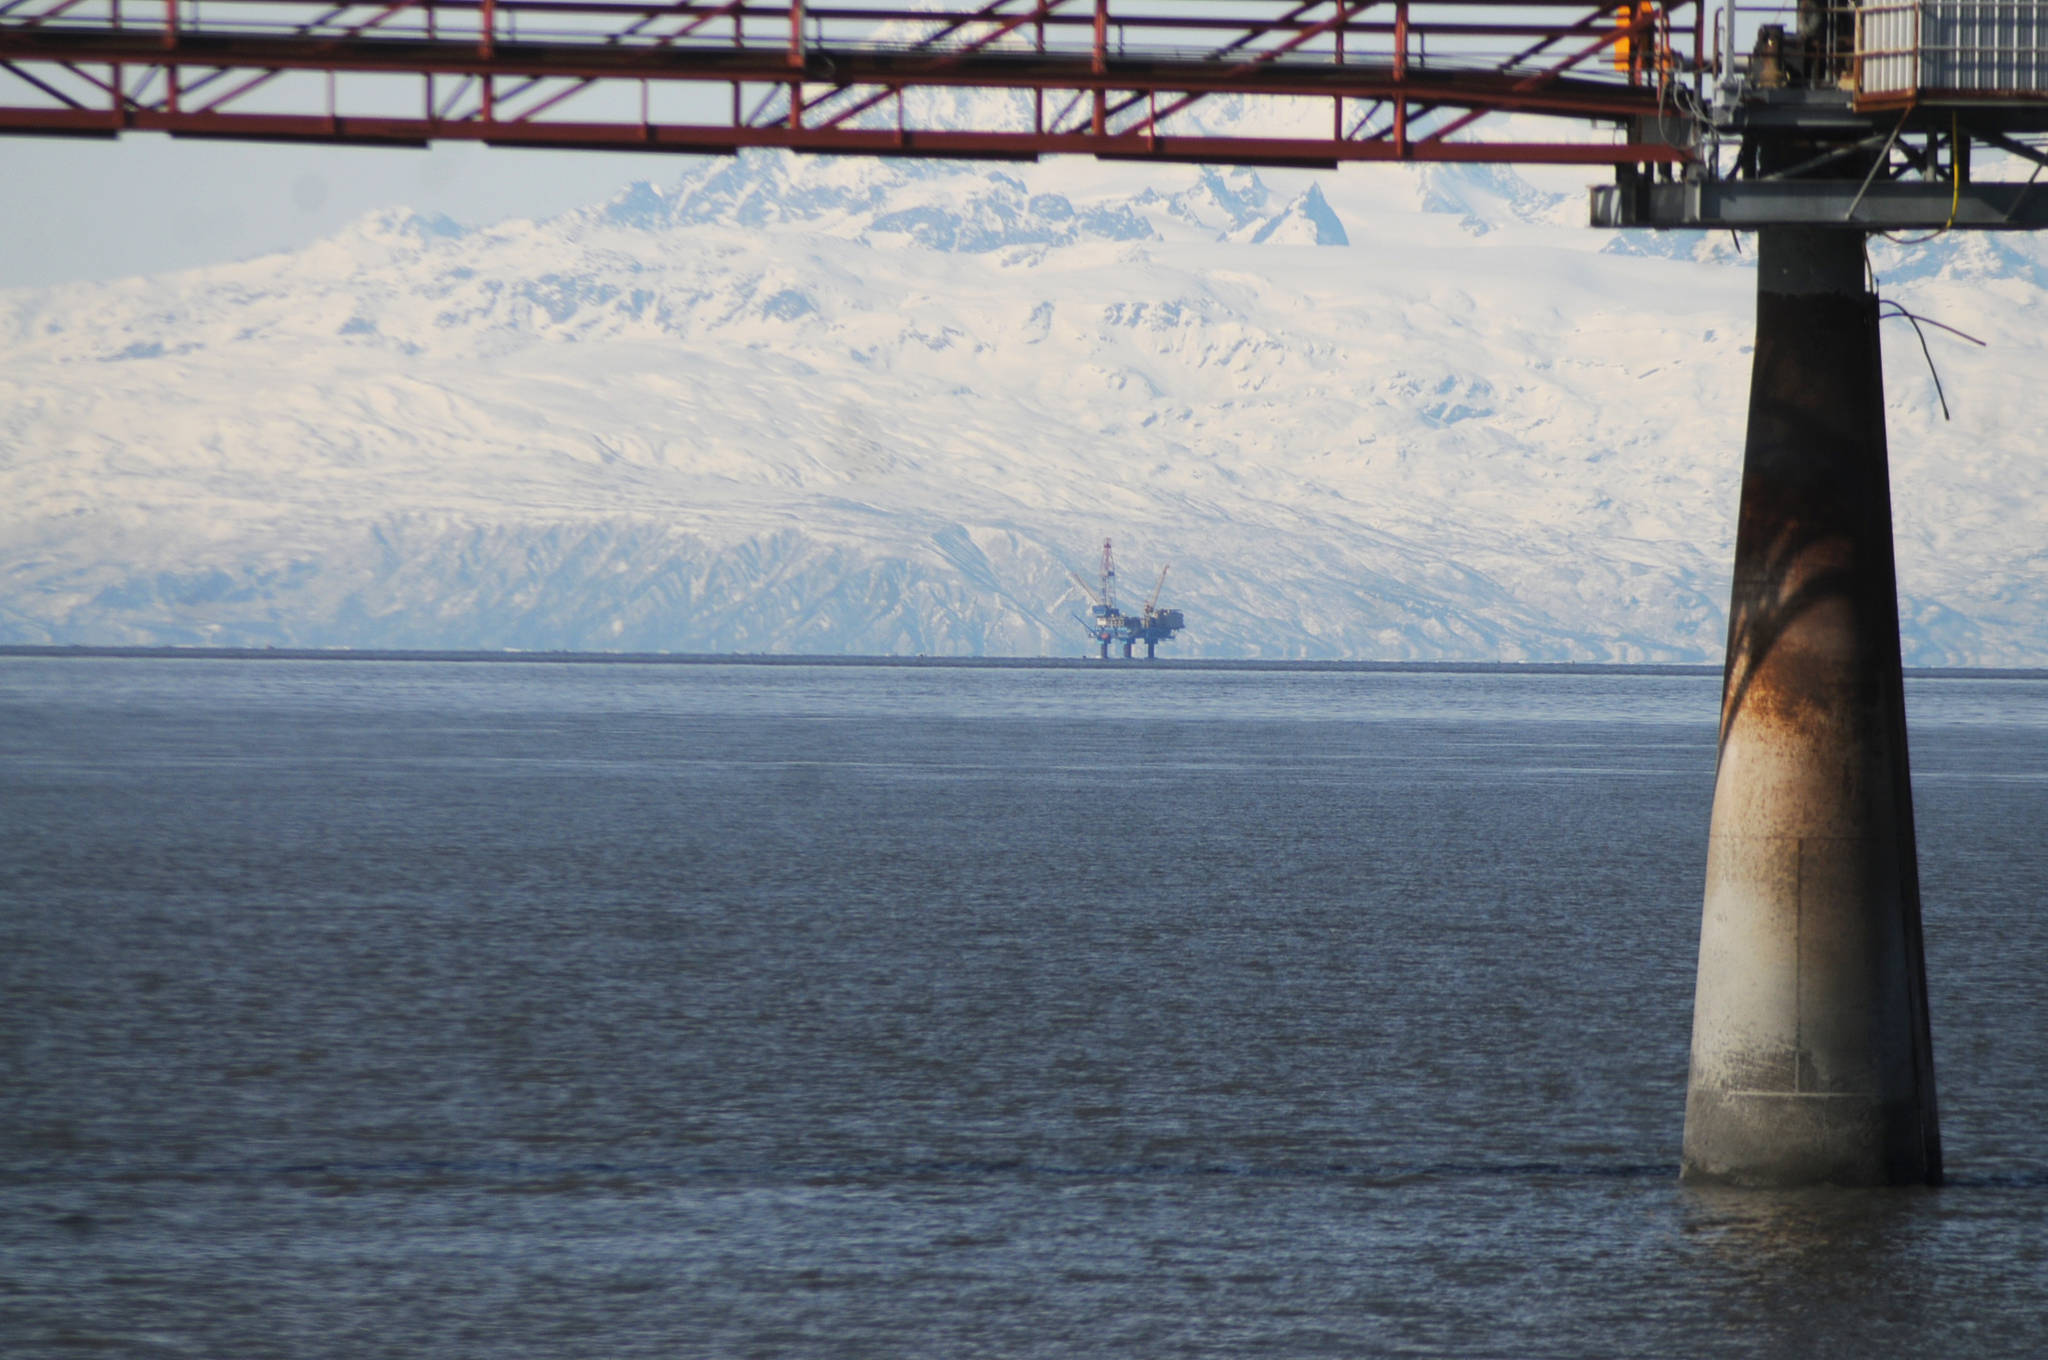 This March 31, 2018 photo shows an offshore drilling platform in Cook Inlet from a beach in Nikiski, Alaska. (Elizabeth Earl | Peninsula Clarion)